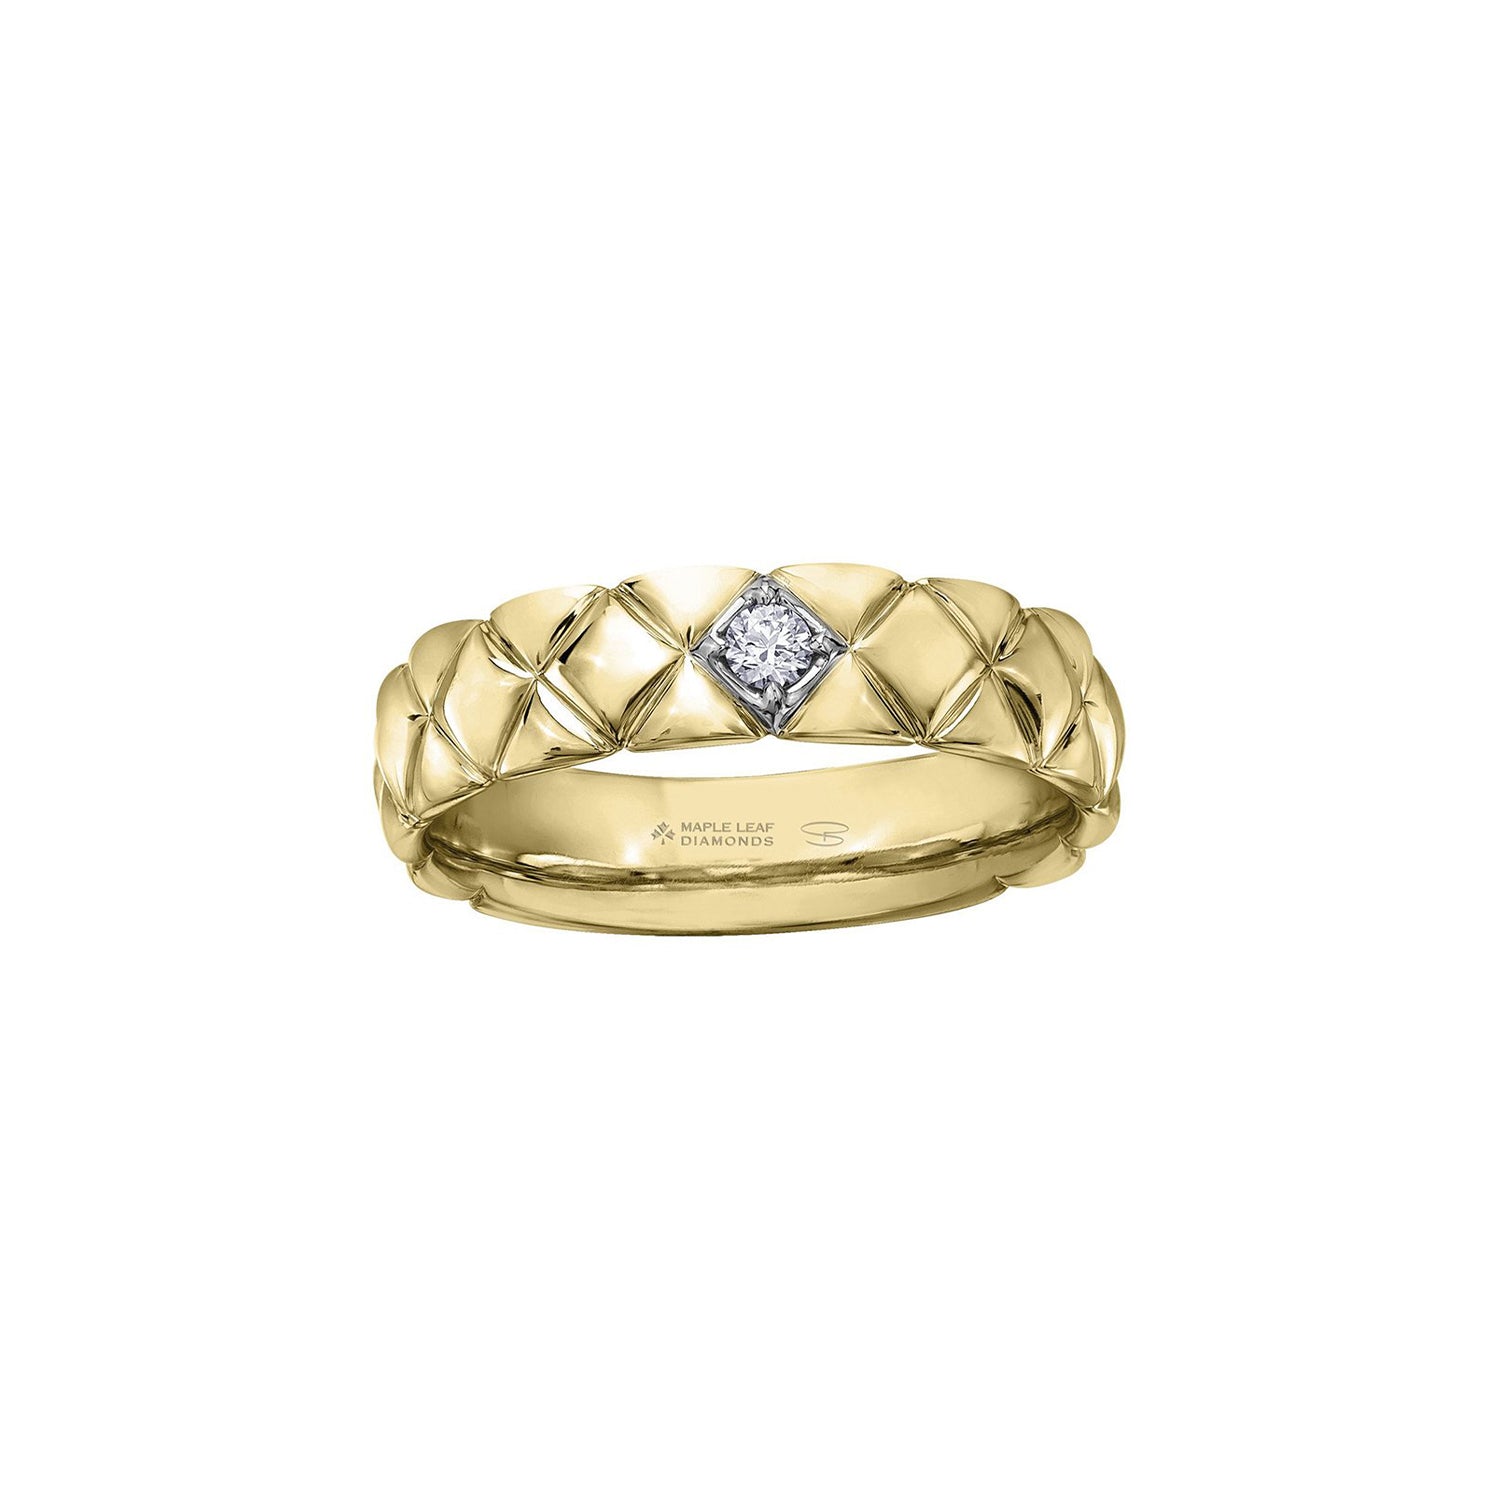 Crafted in 14KT yellow Certified Canadian Gold, this men’s ring features a round brilliant-cut Canadian diamond set on a quilted band. 